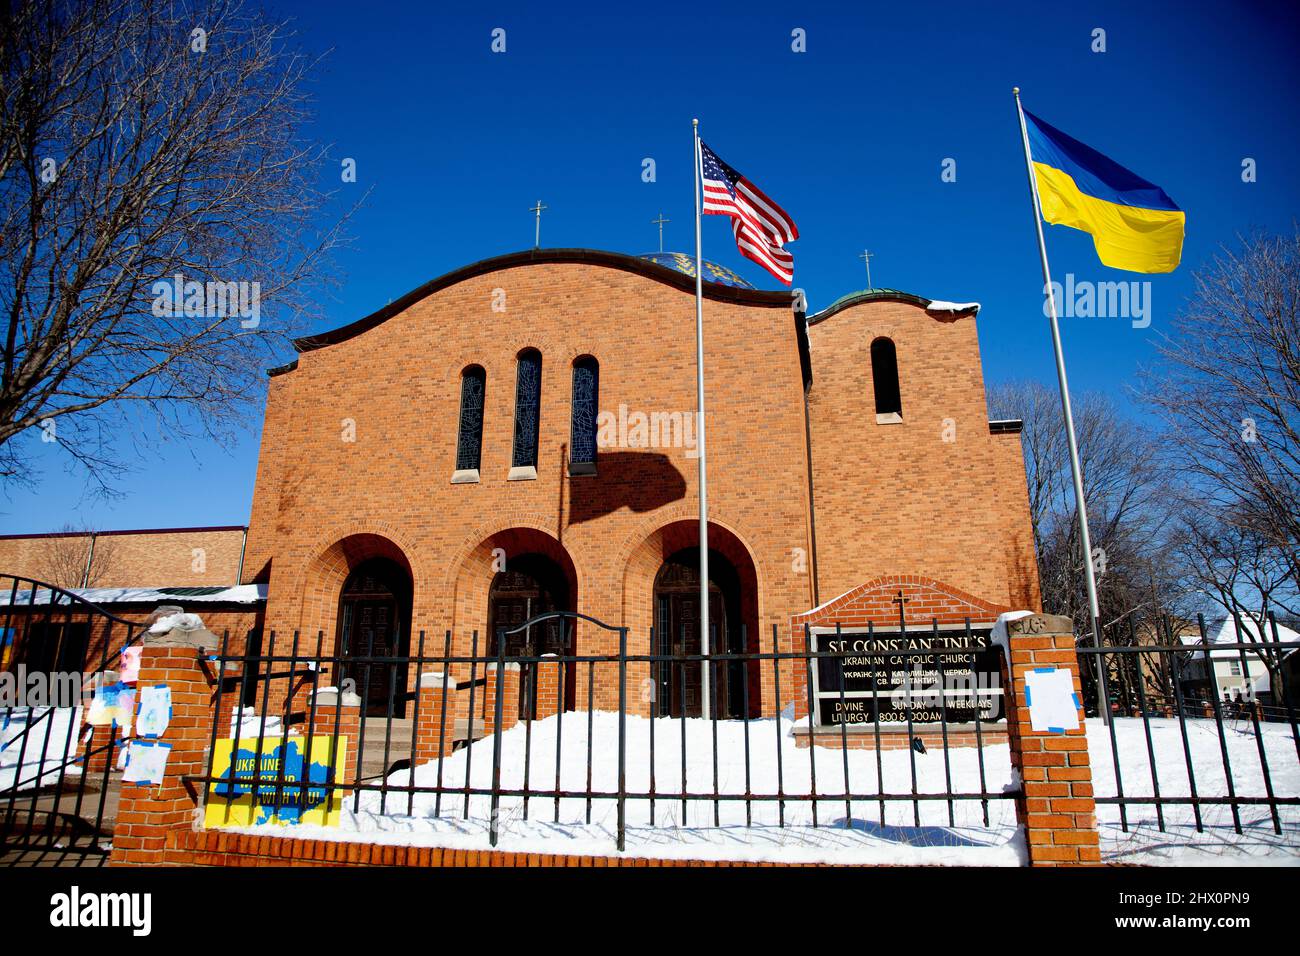 St. Constantine Ukrainian Catholic Church with both the Ukraine and American flag flying together showing support. Minneapolis Minnesota MN USA Stock Photo